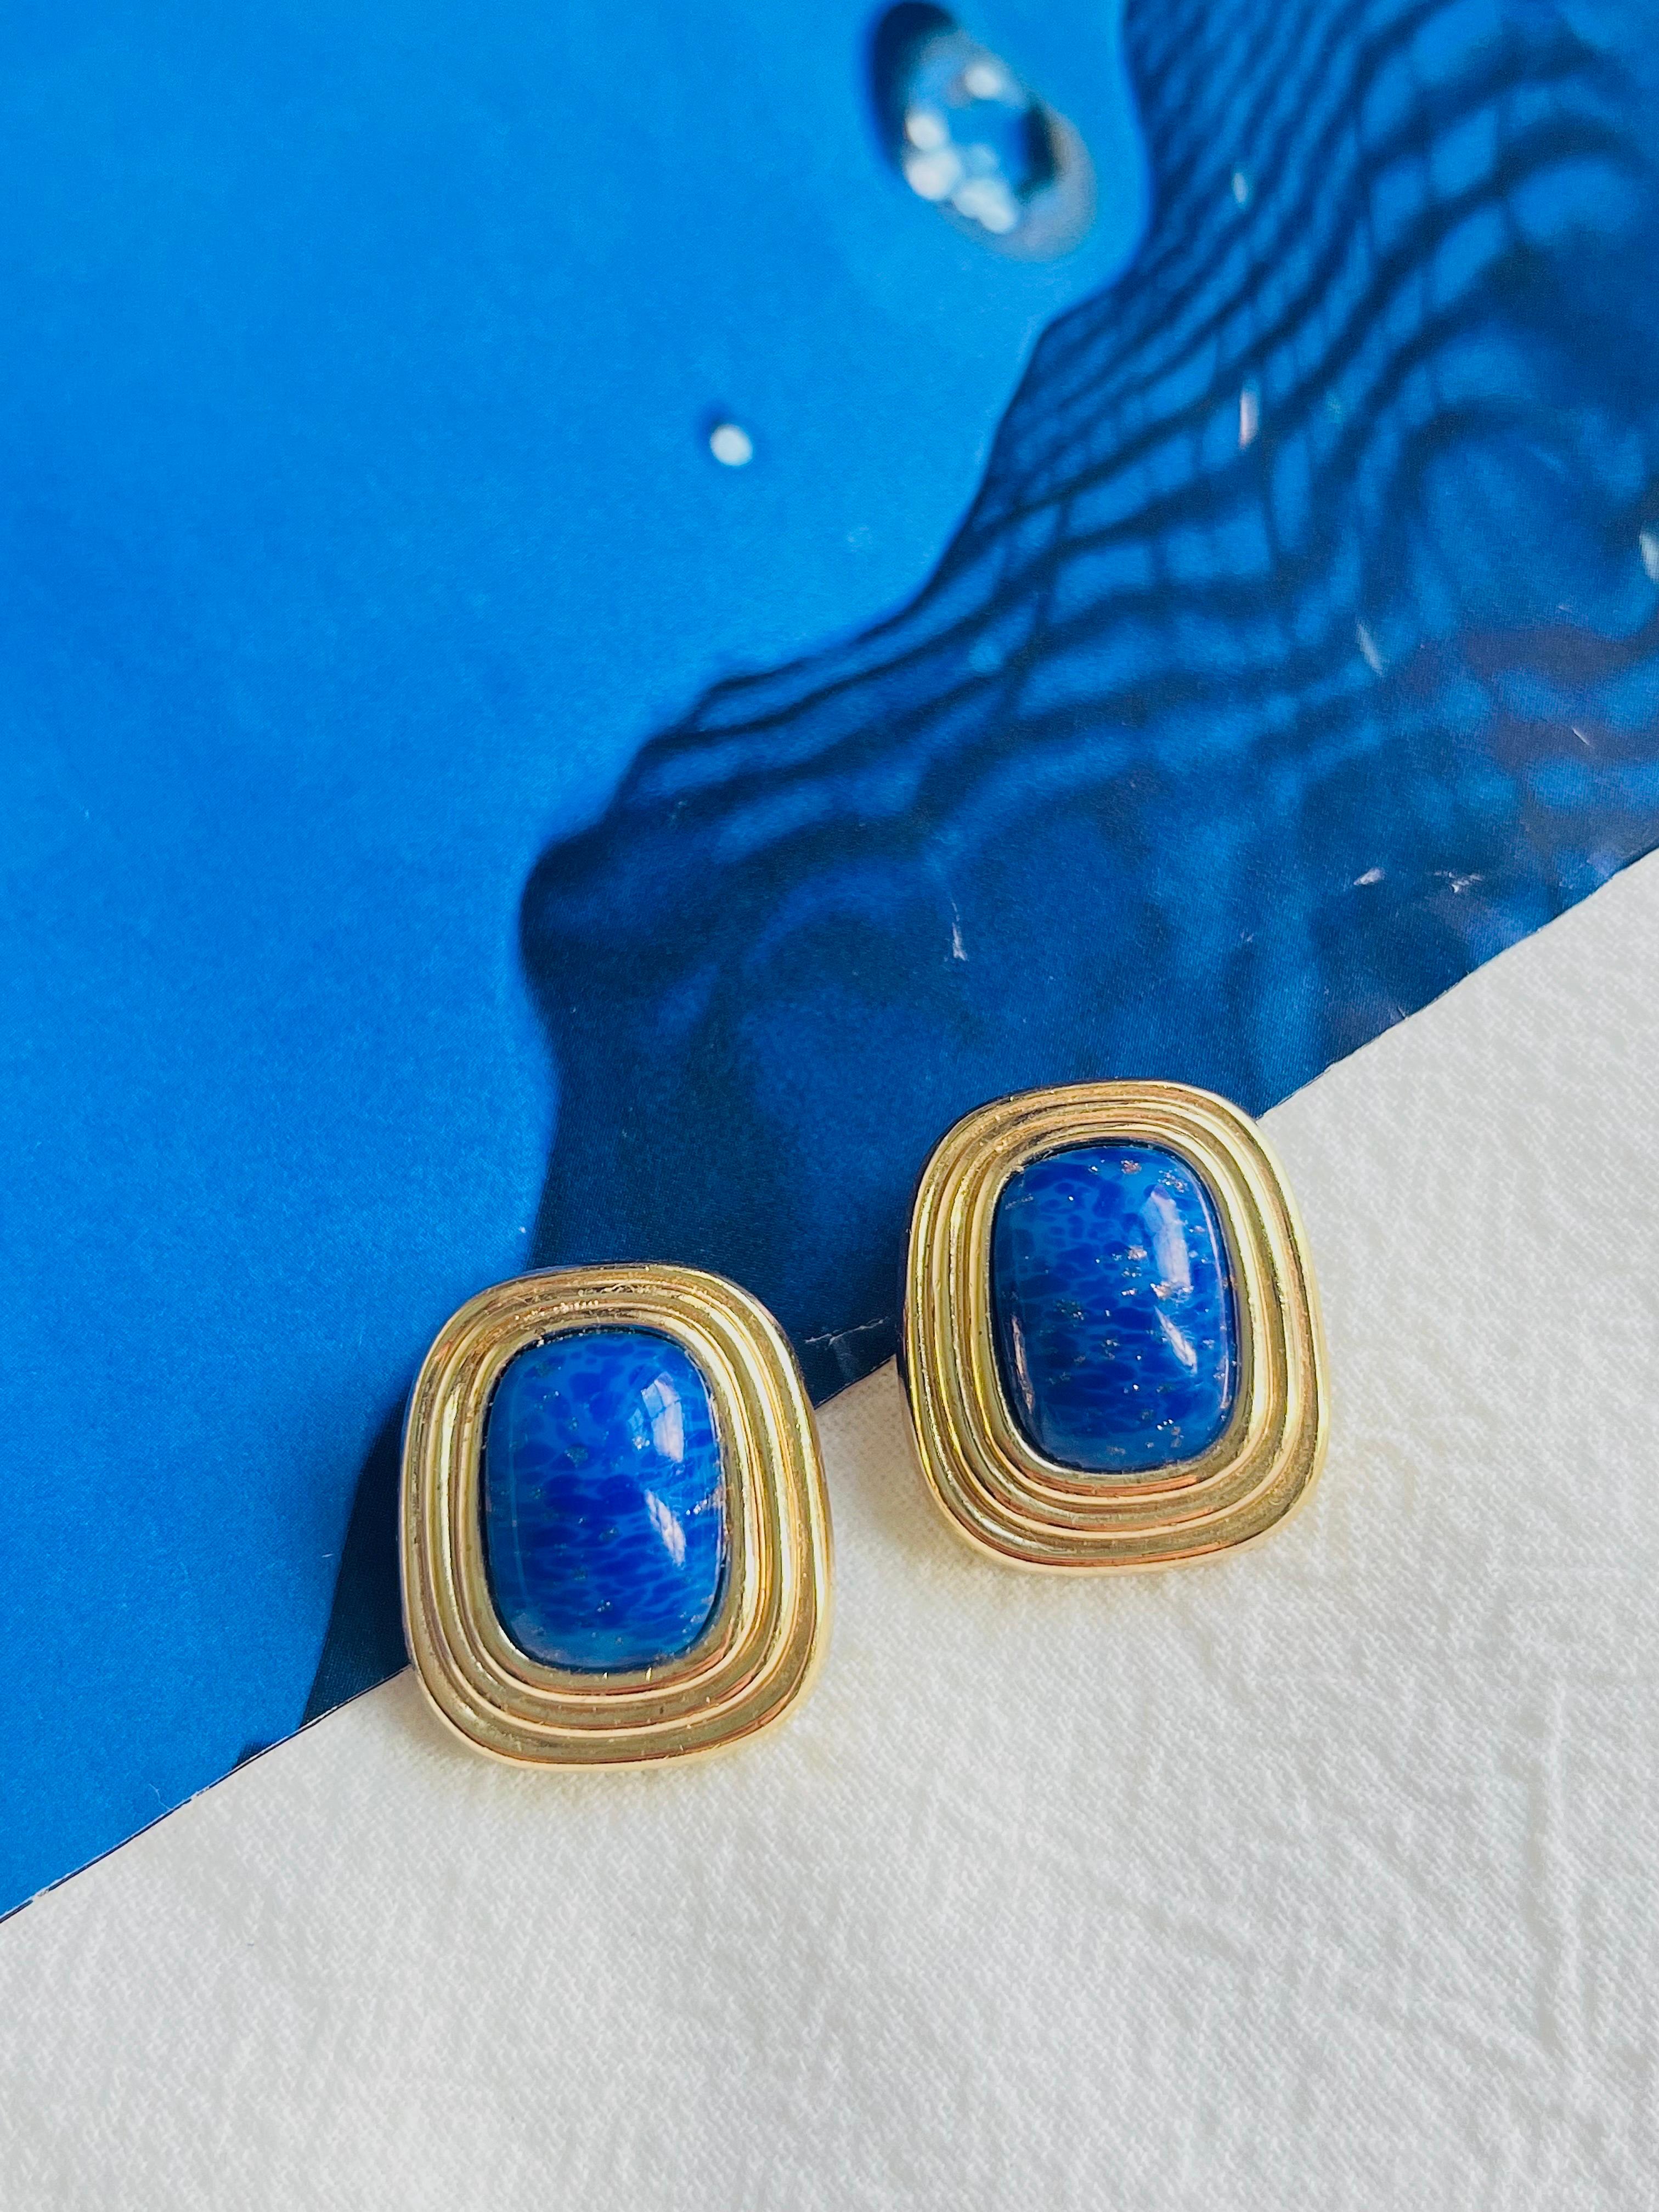 Christian Dior Vintage 1980 Gripoix Lapis Navy Cabochon Rectangle Clip Earrings, Gold Tone

Very good condition. Vintage and rare to find. 100% Genuine.

Some light scratches or colour loss, barely noticeable.

A very beautiful pair of clip on